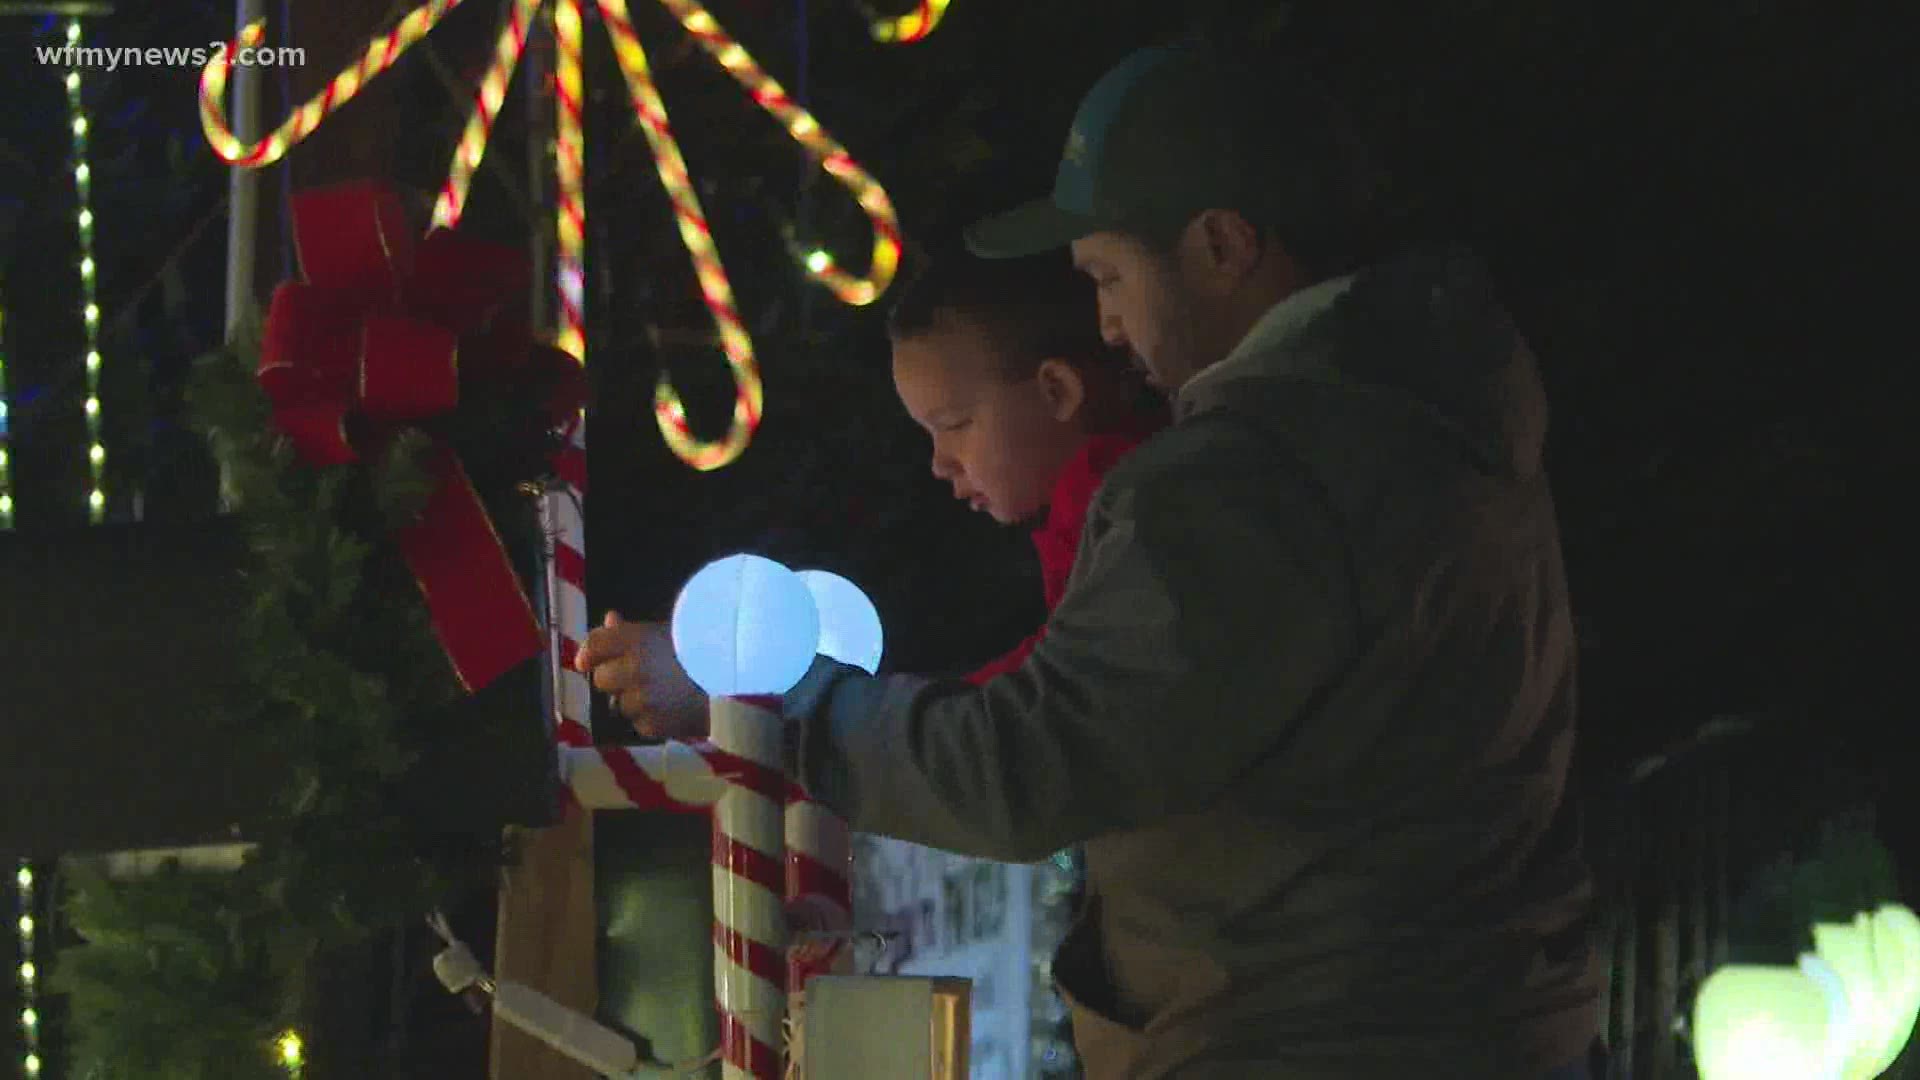 Thieves stole a donation box from the Maple Ridge Lights display in Burlington. The donations benefit the UNC children’s hospital.